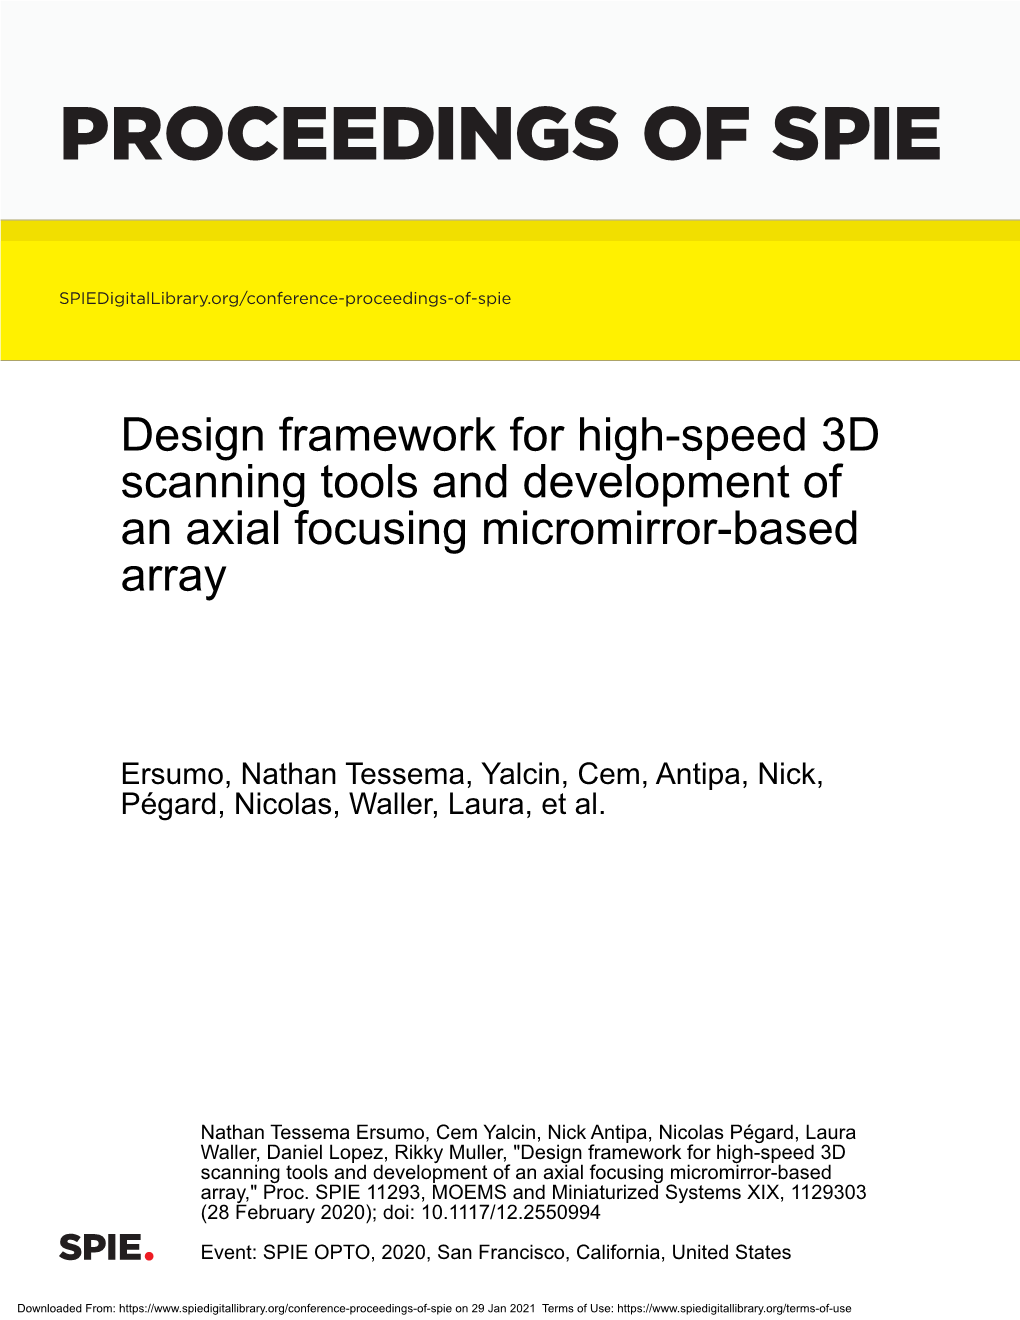 Design Framework for High-Speed 3D Scanning Tools and Development of an Axial Focusing Micromirror-Based Array